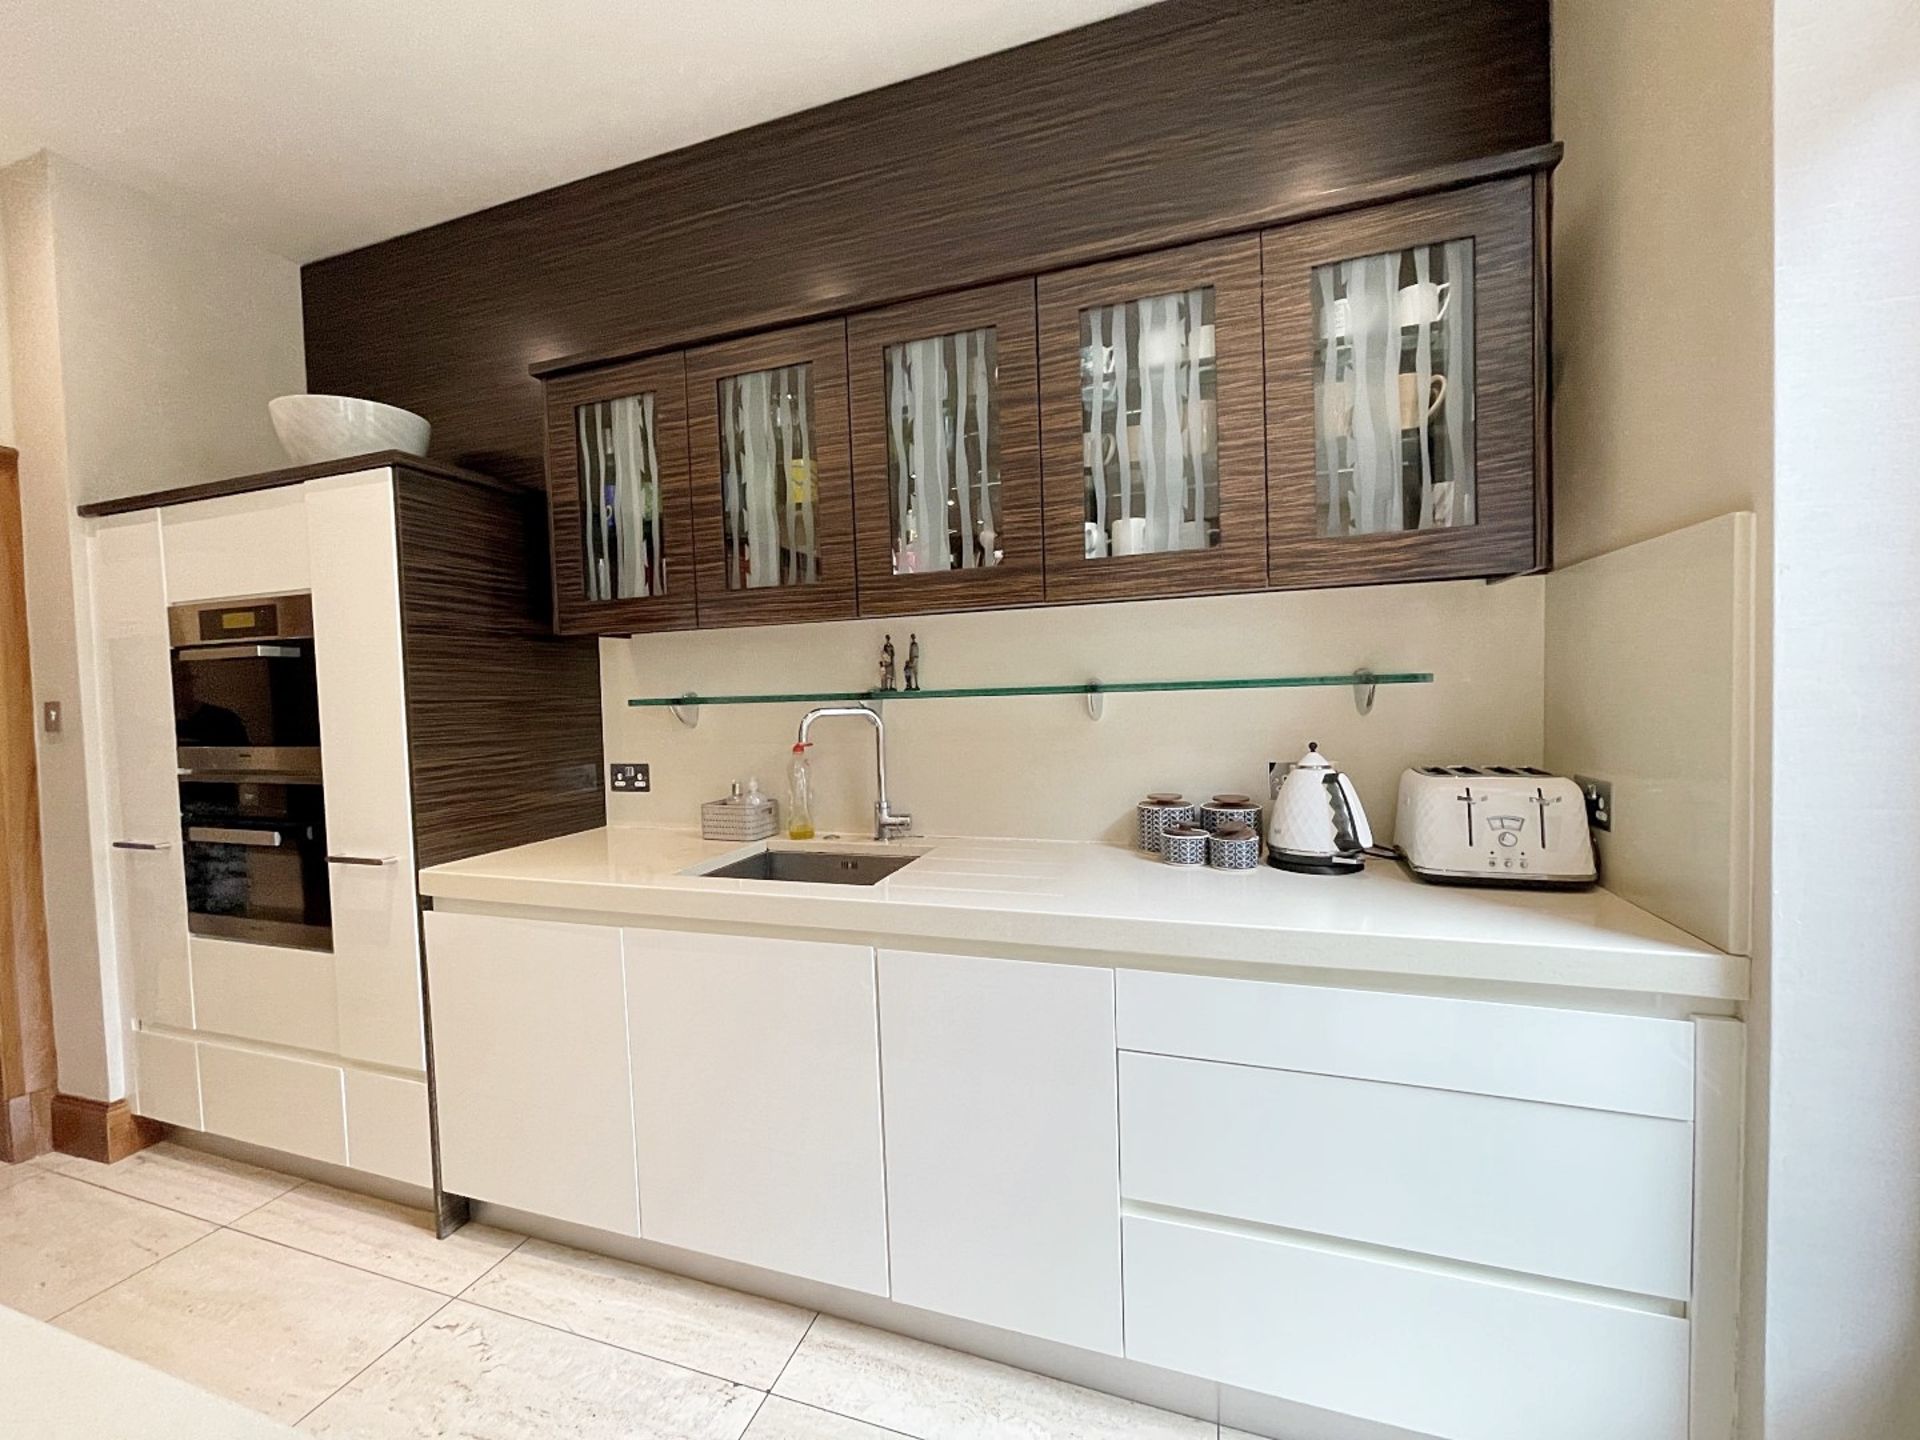 1 x Bespoke Fitted Mowlem & Co Kitchen With Miele, Wolf, and Sub Zero Appliances & Granite Worktops - Image 29 of 131